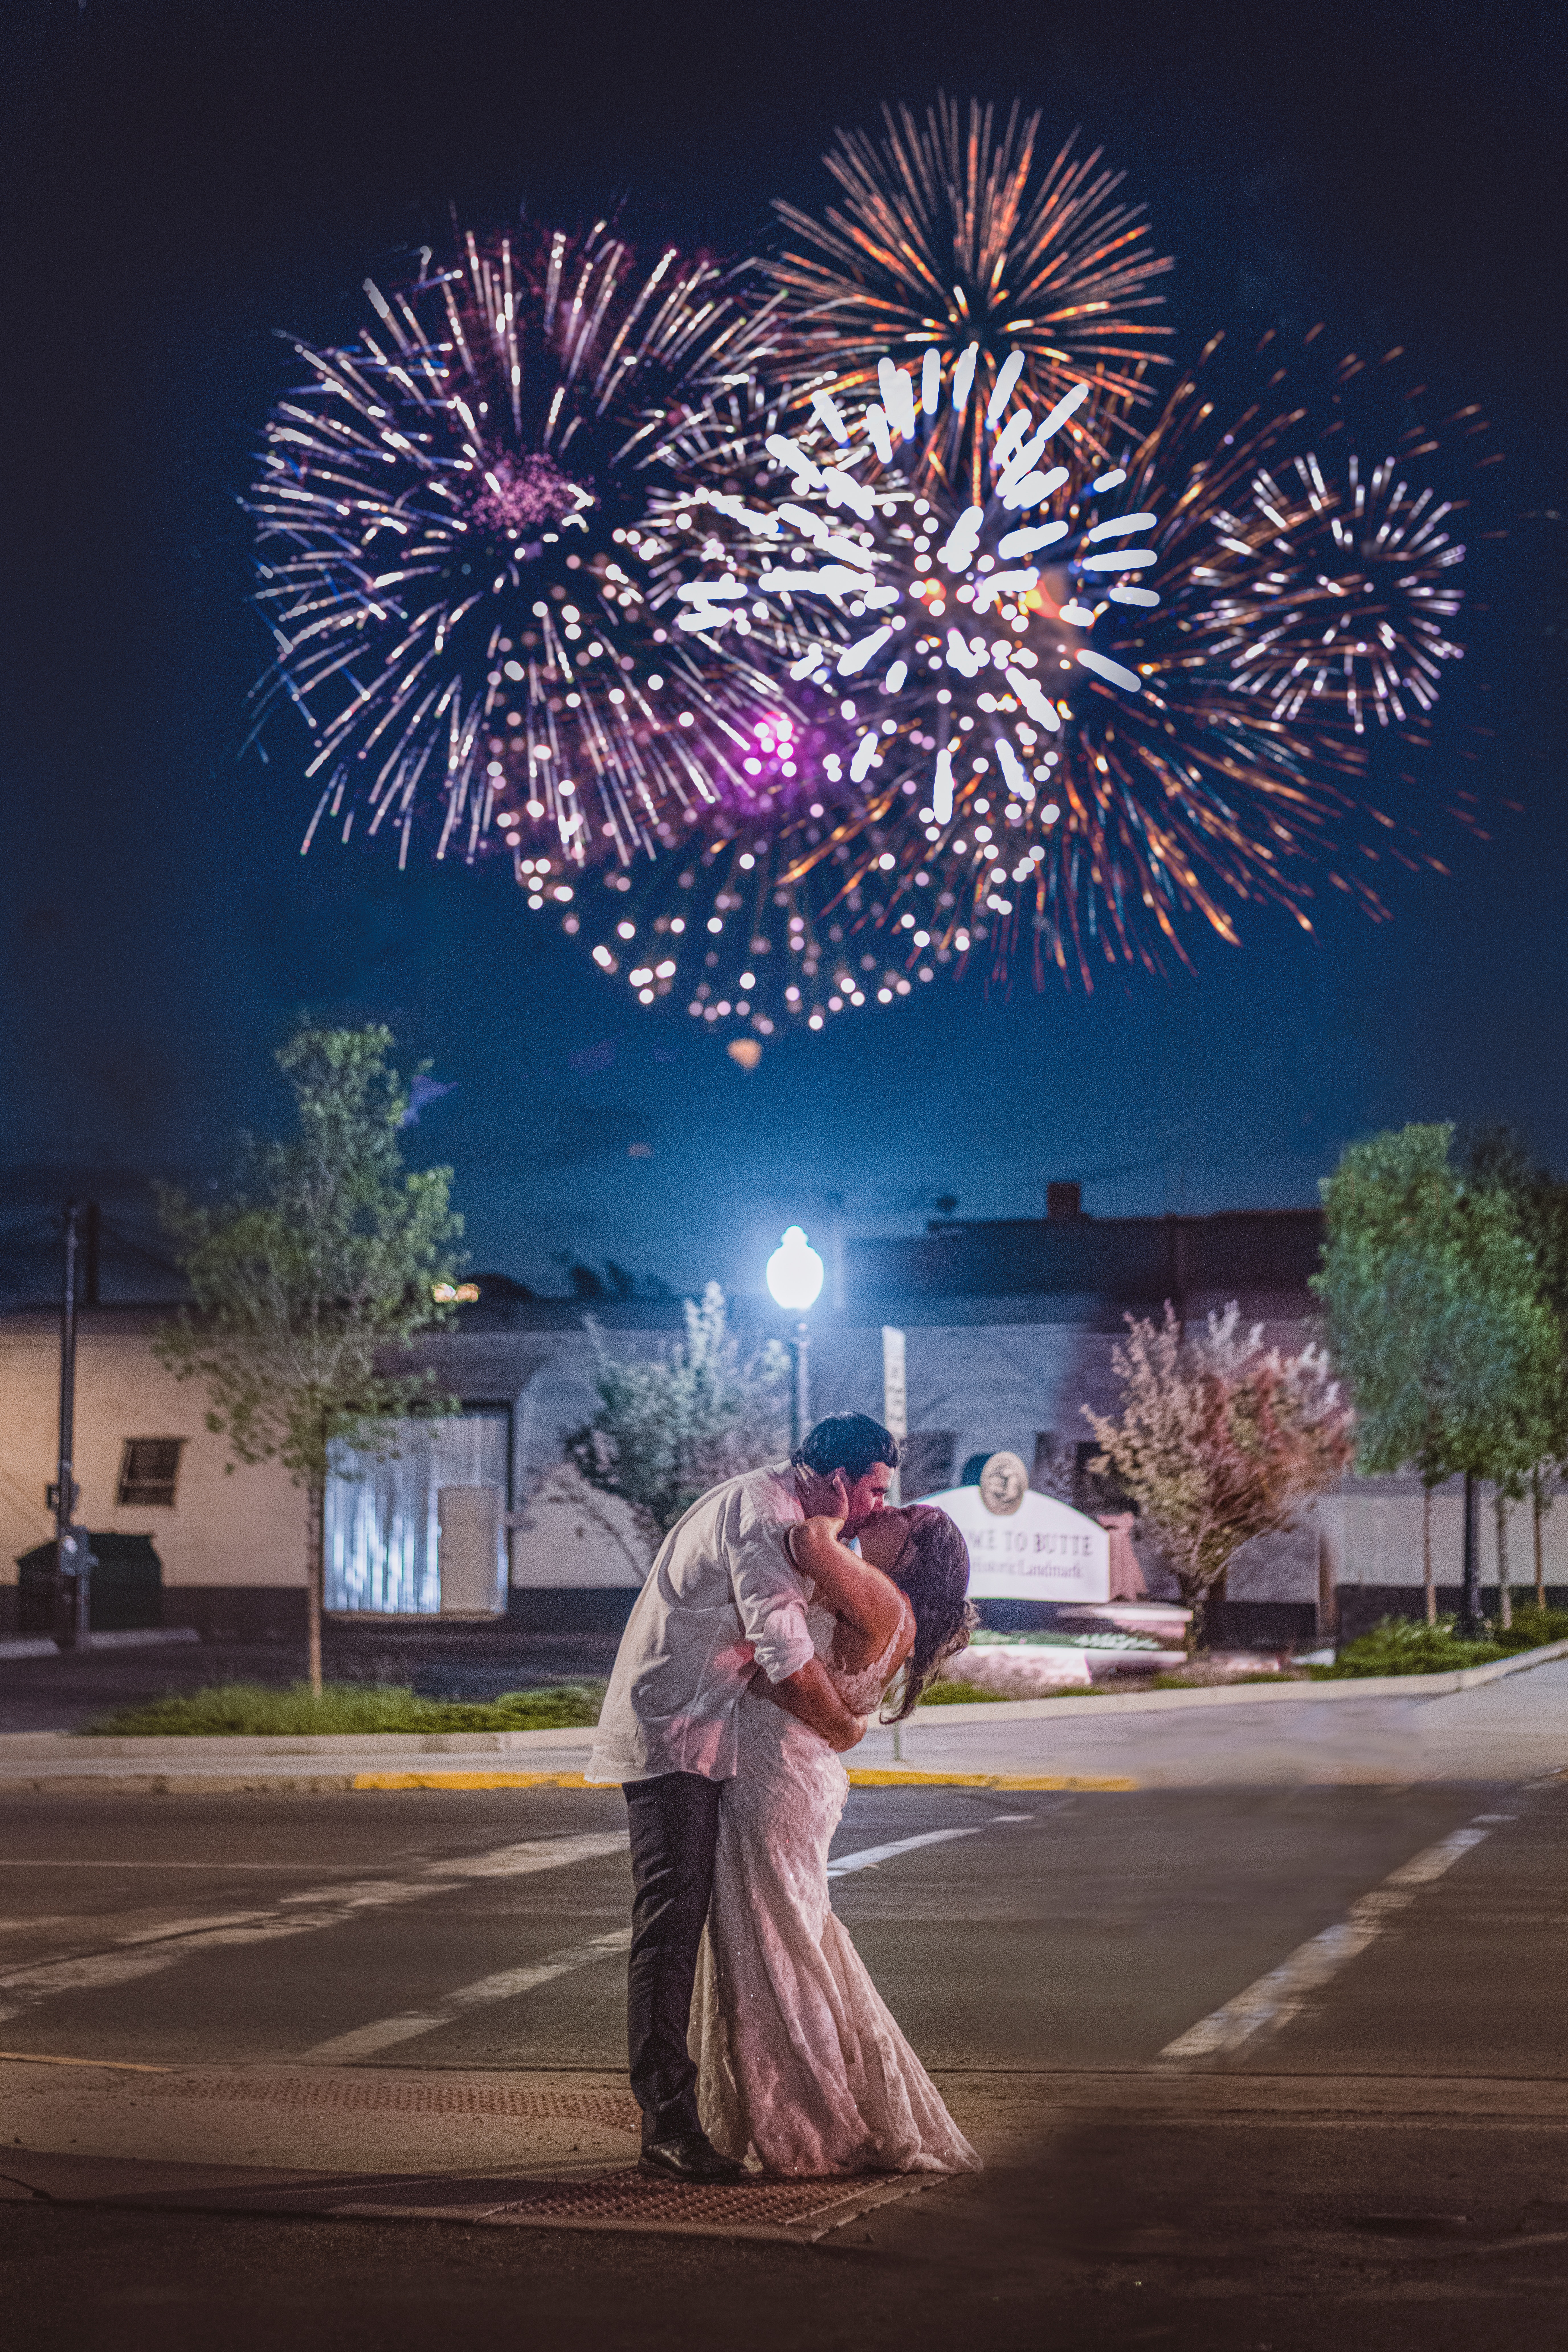 A couple kissing in the street with fireworks in the background. | Source: Unsplash